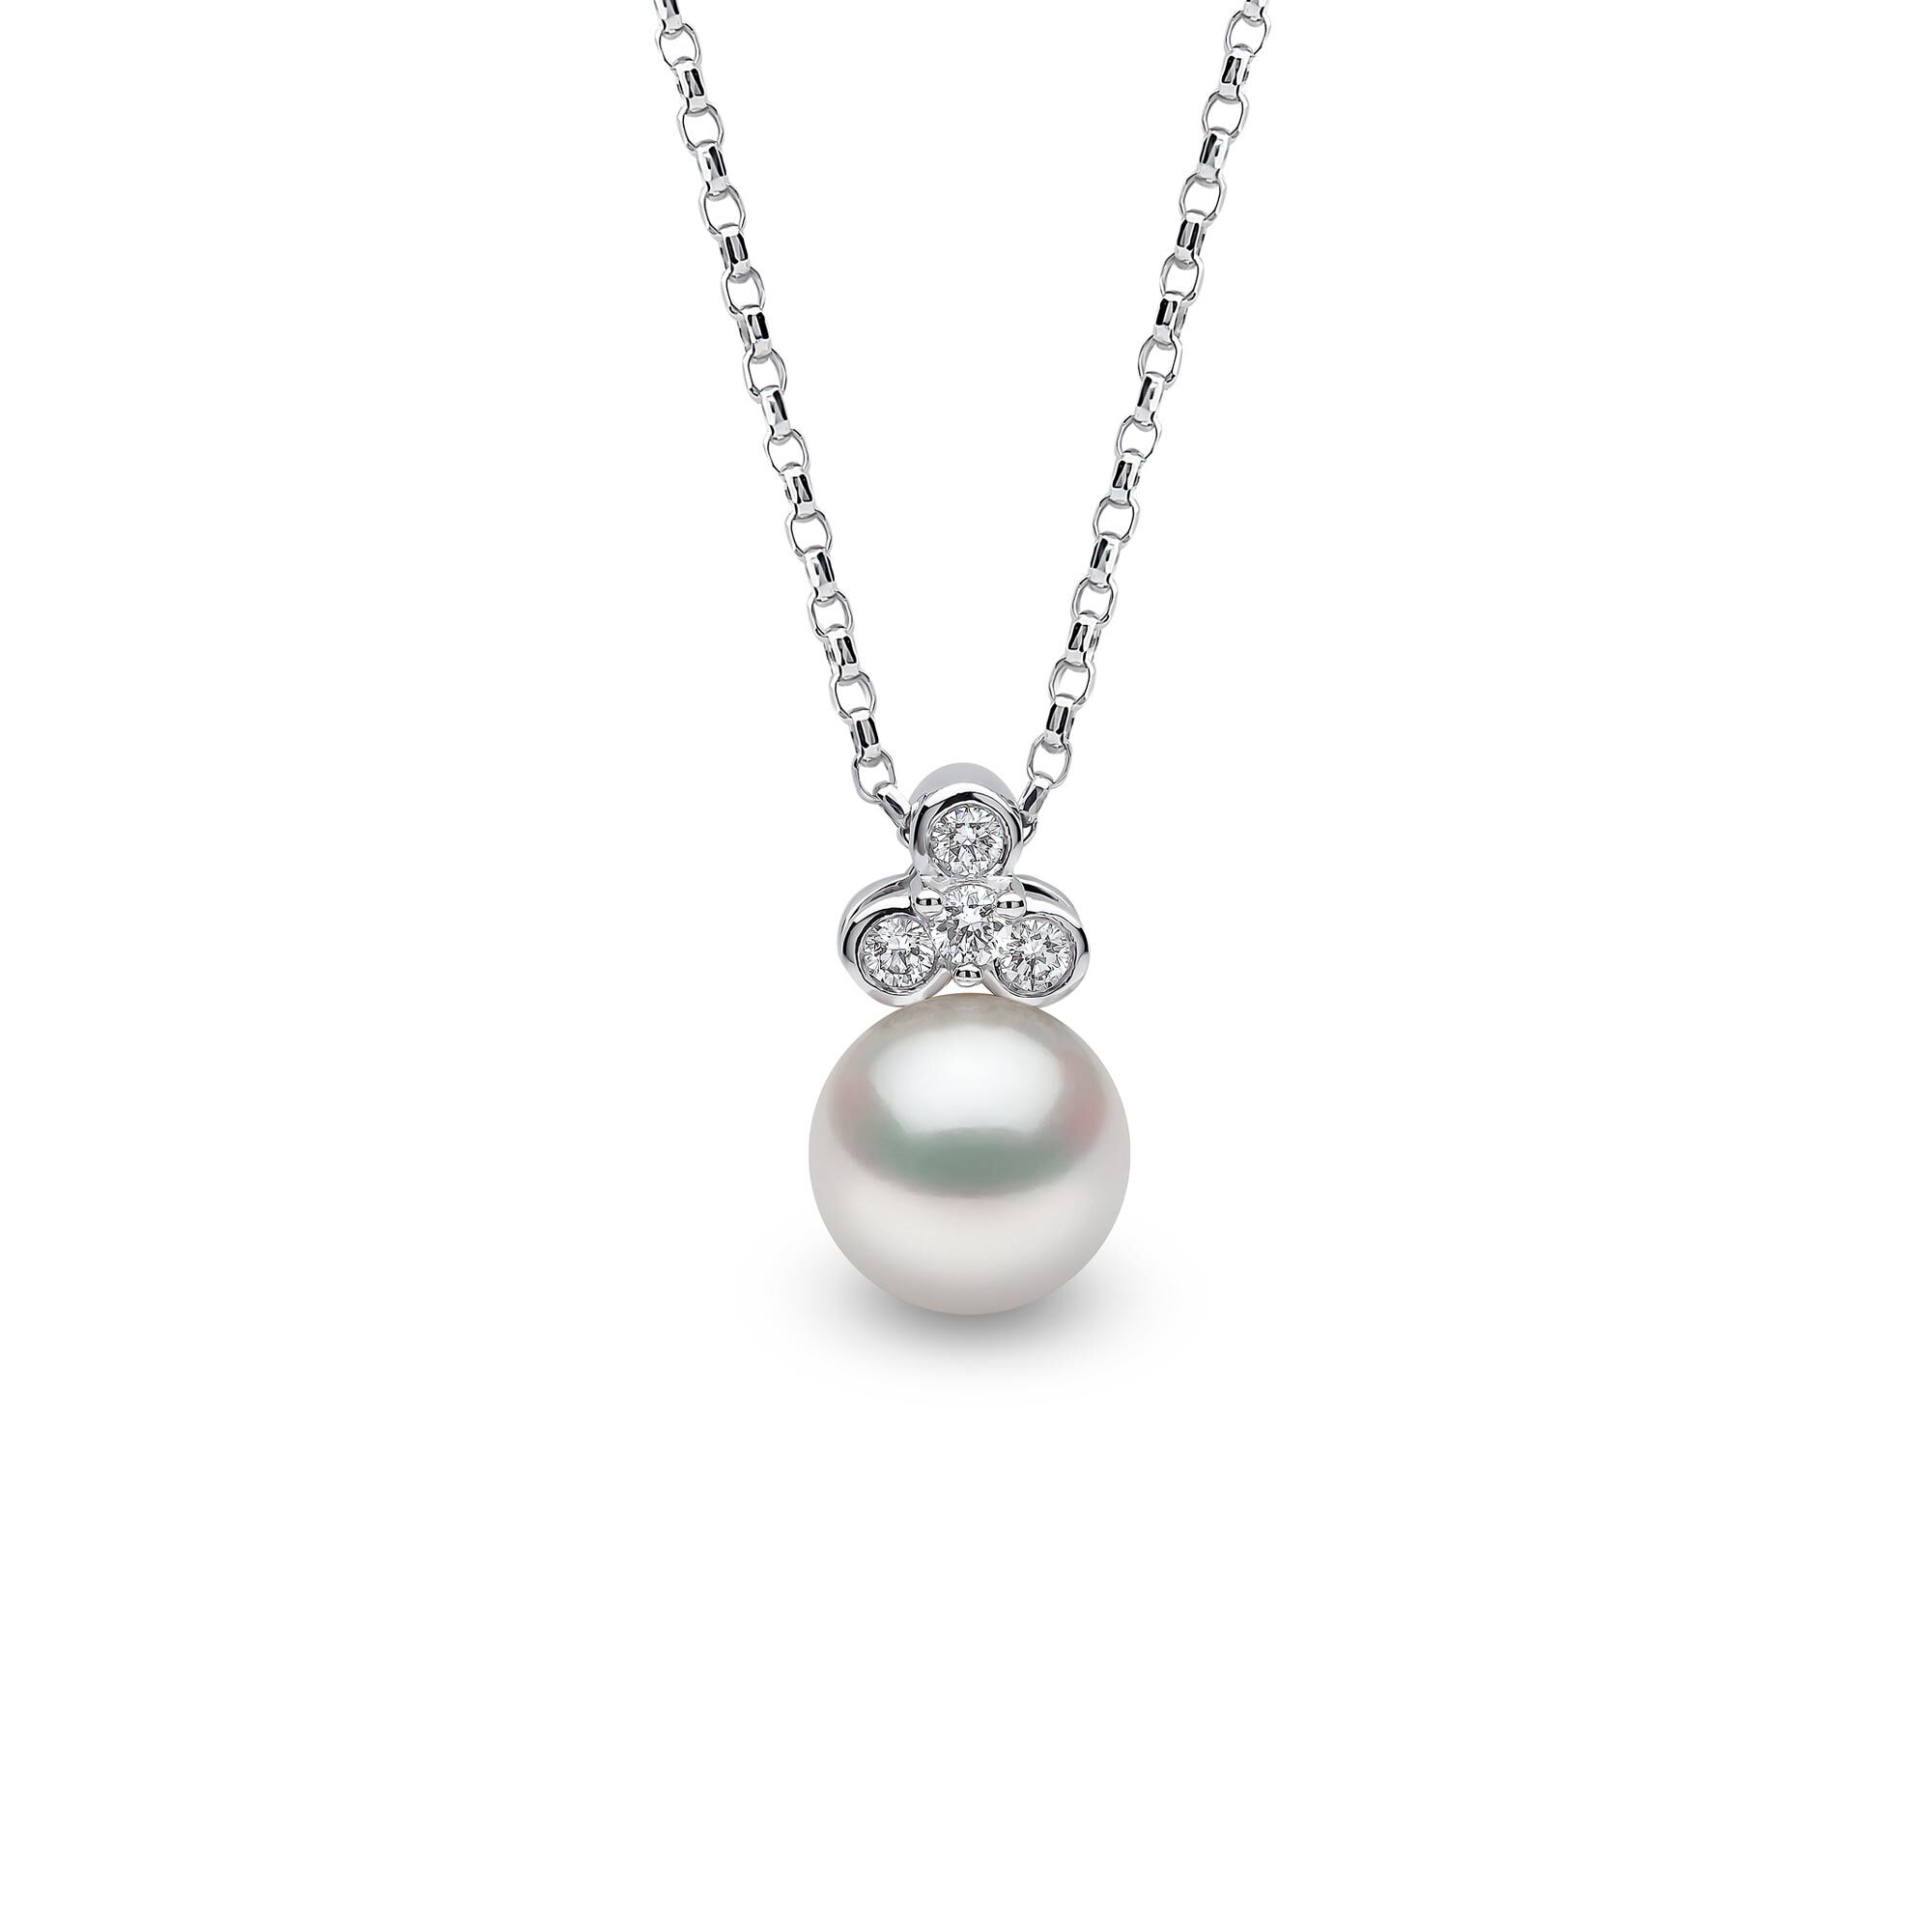 Trend White Gold Pearl and Diamond Necklace | Yoko London 